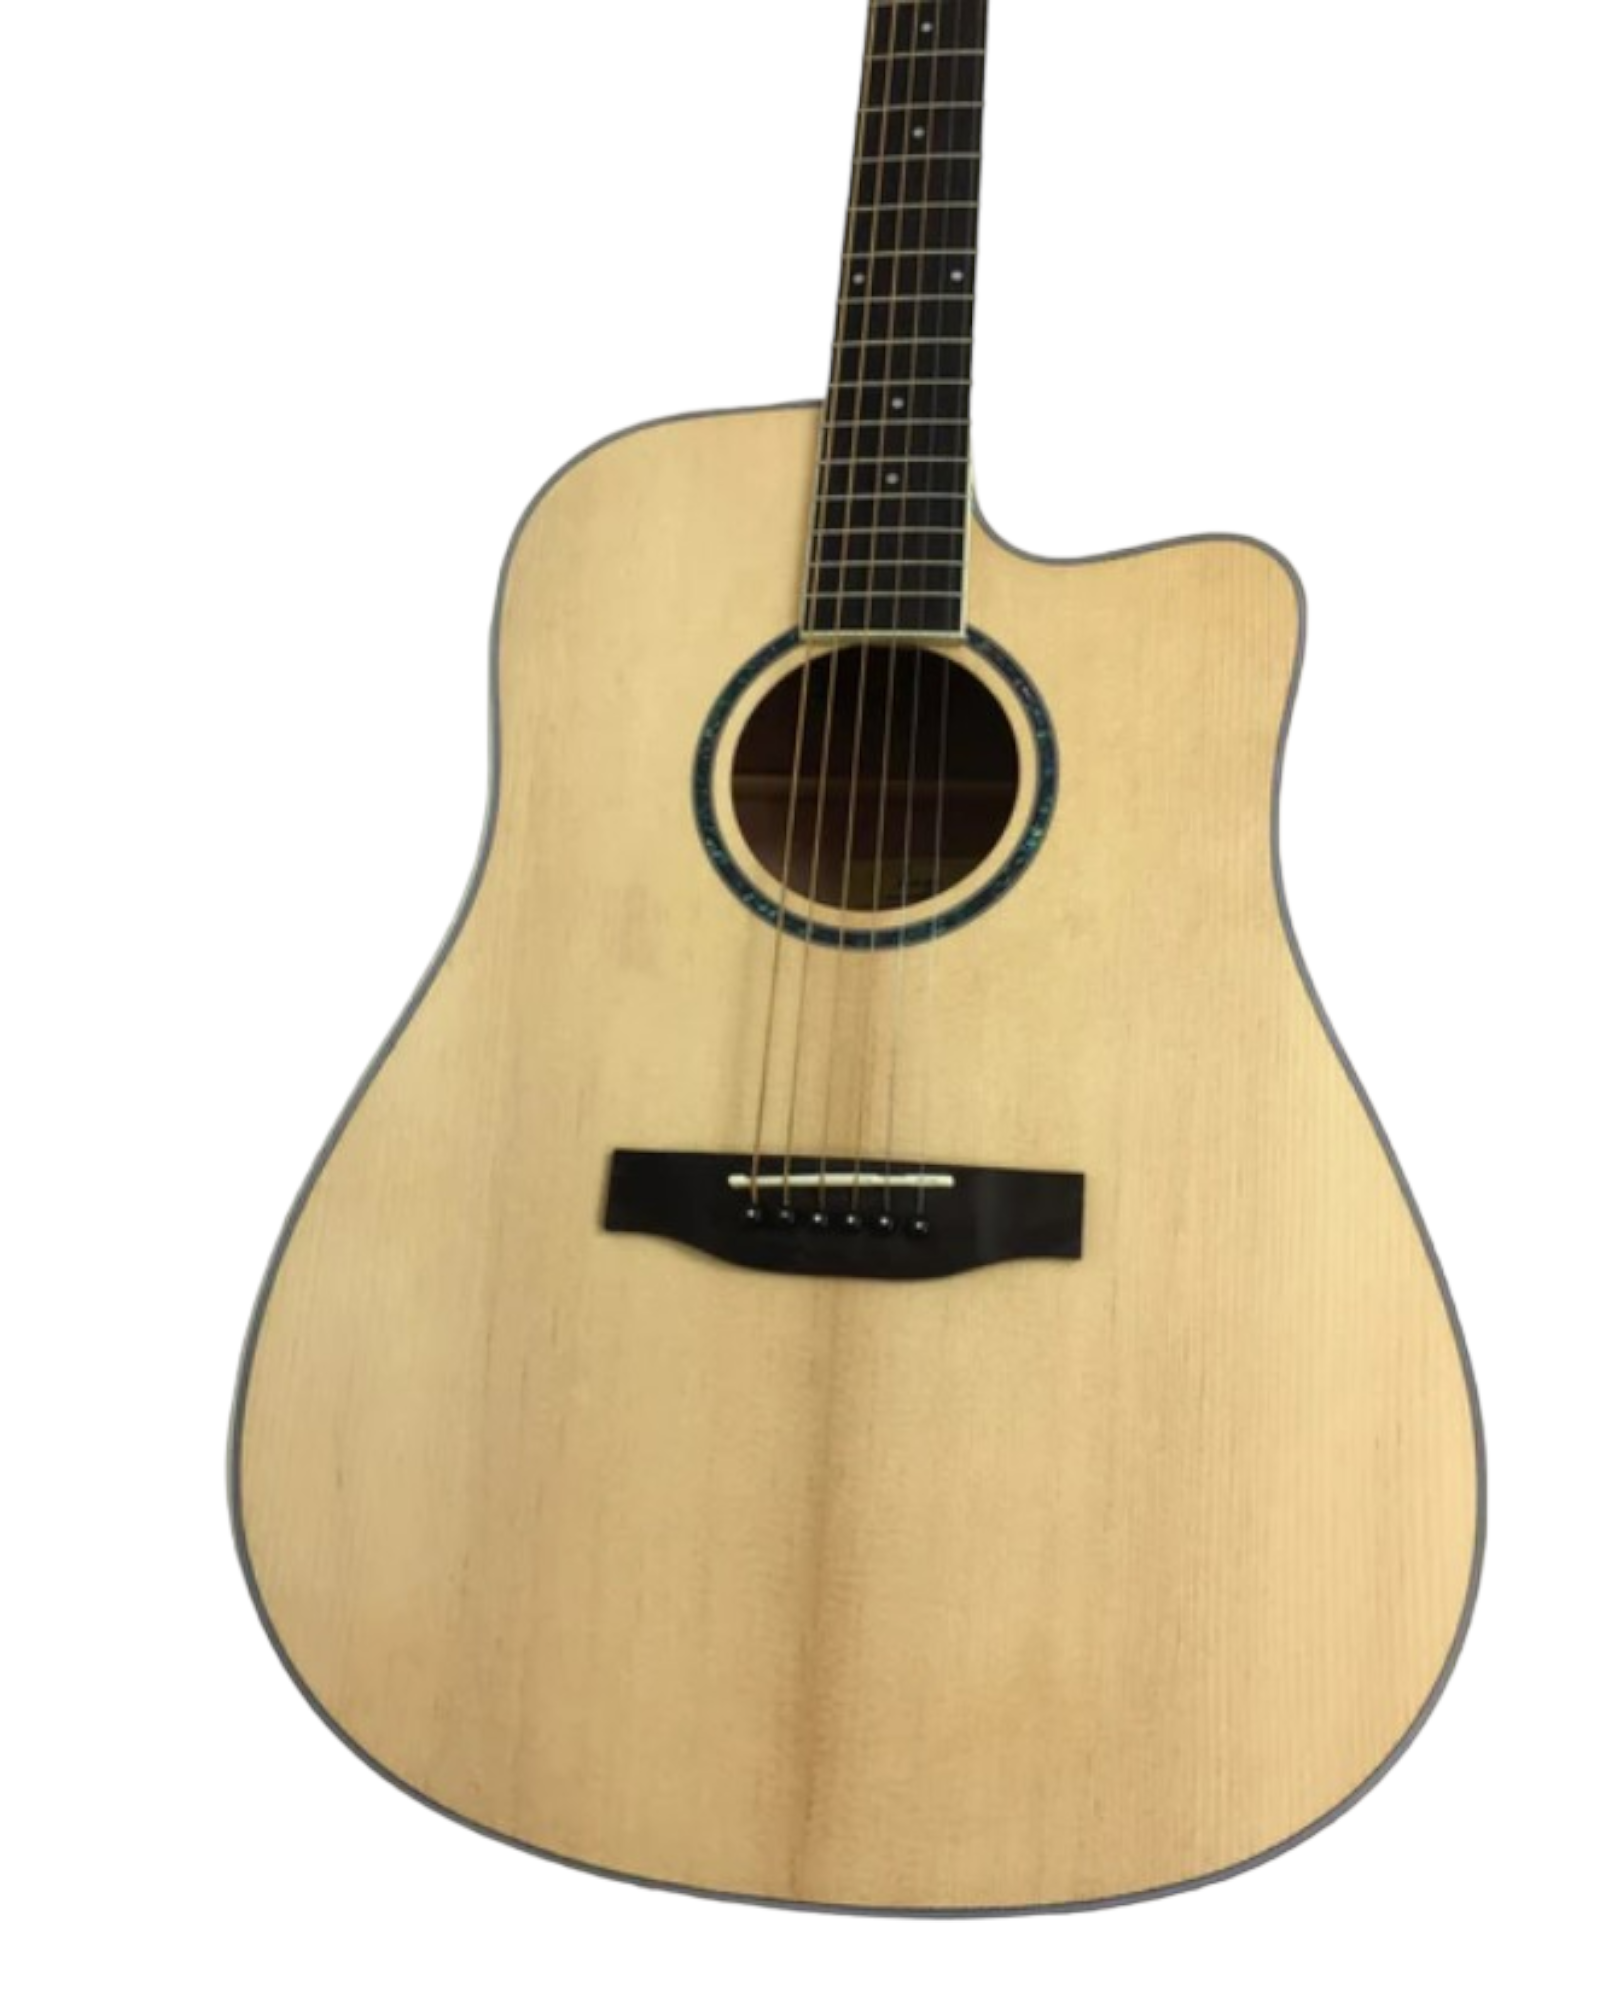 Haze Solid Spruce Top Dreadnought Cutaway Acoustic Guitar - Natural CD60SCN